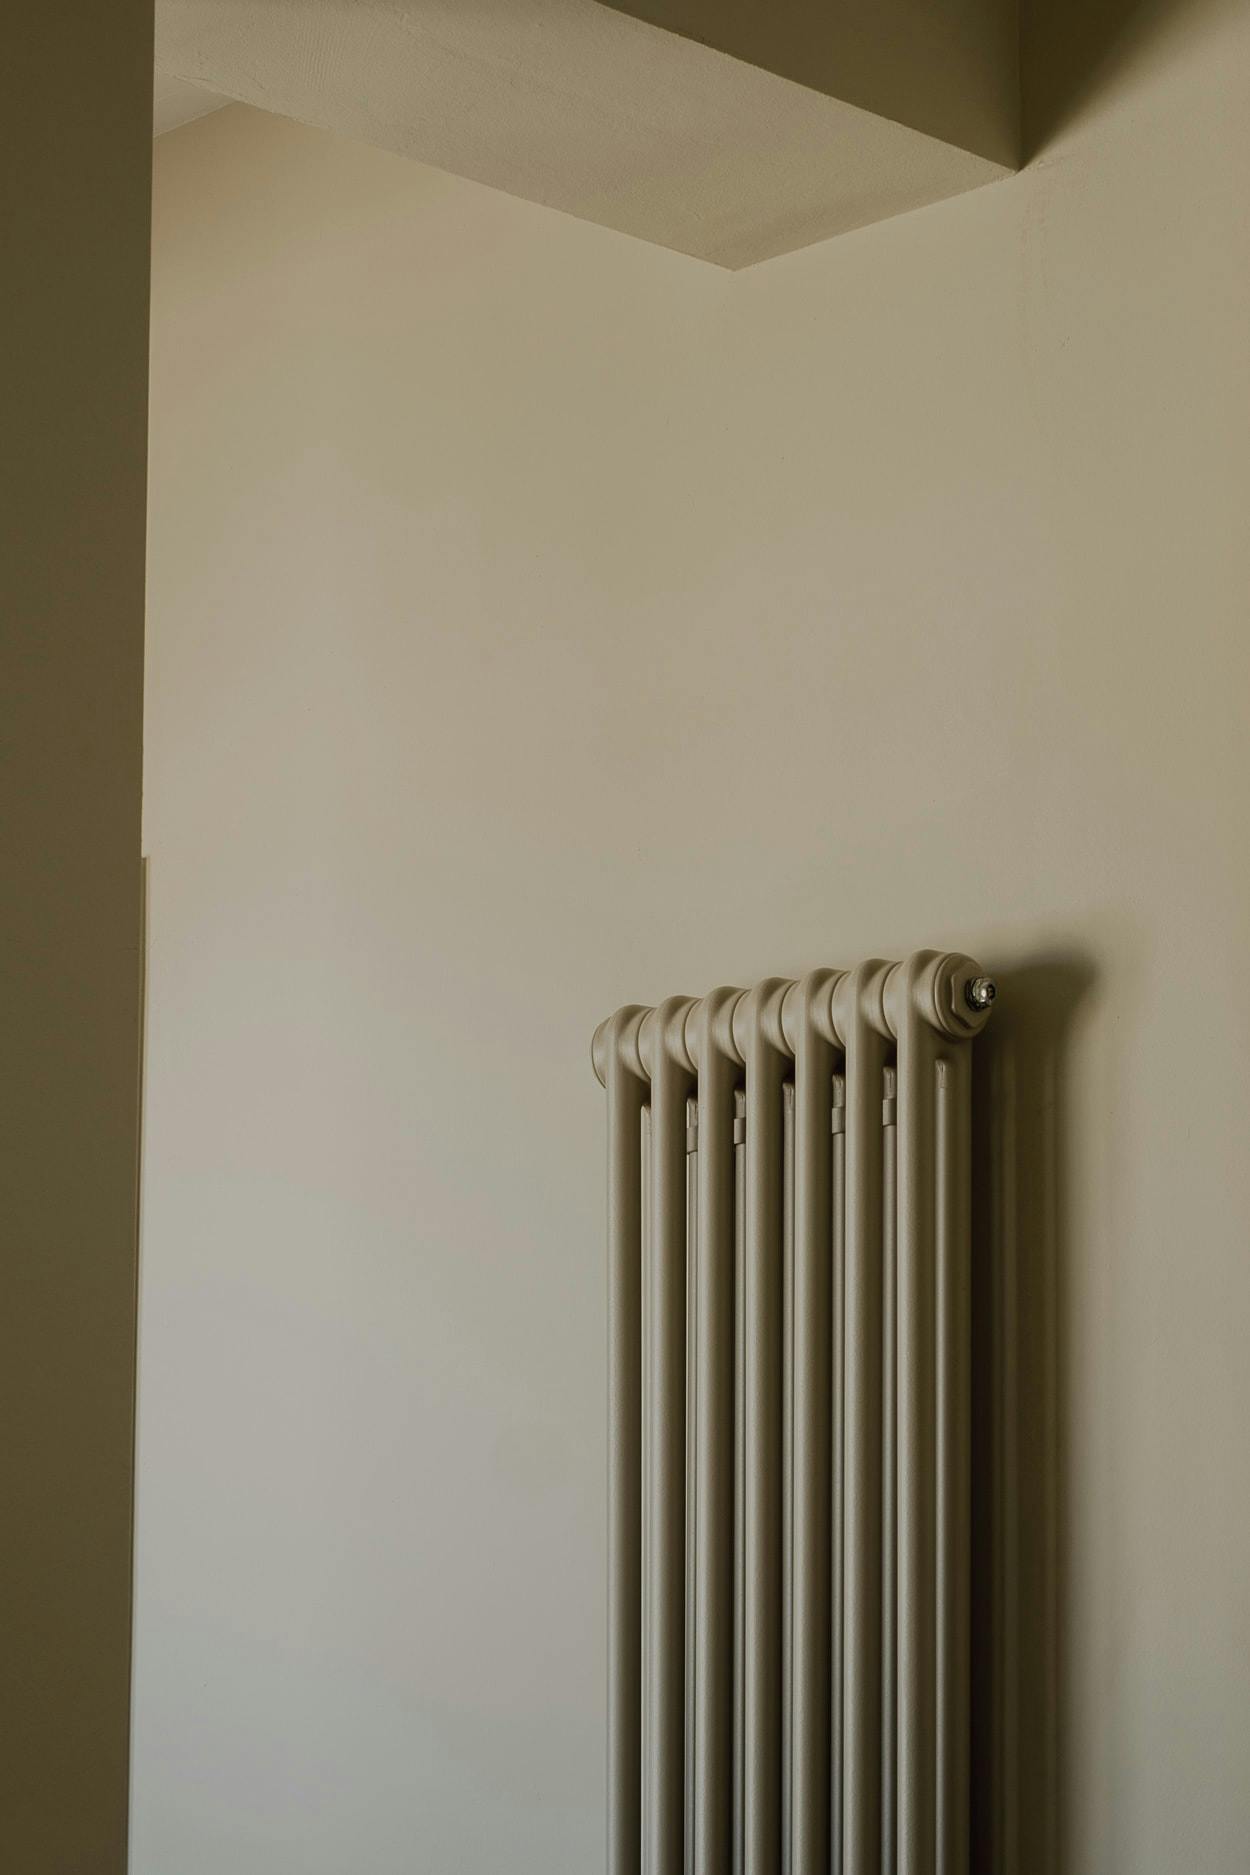 A large, white, and silver radiator is mounted on the wall in a room, providing heat to the space.